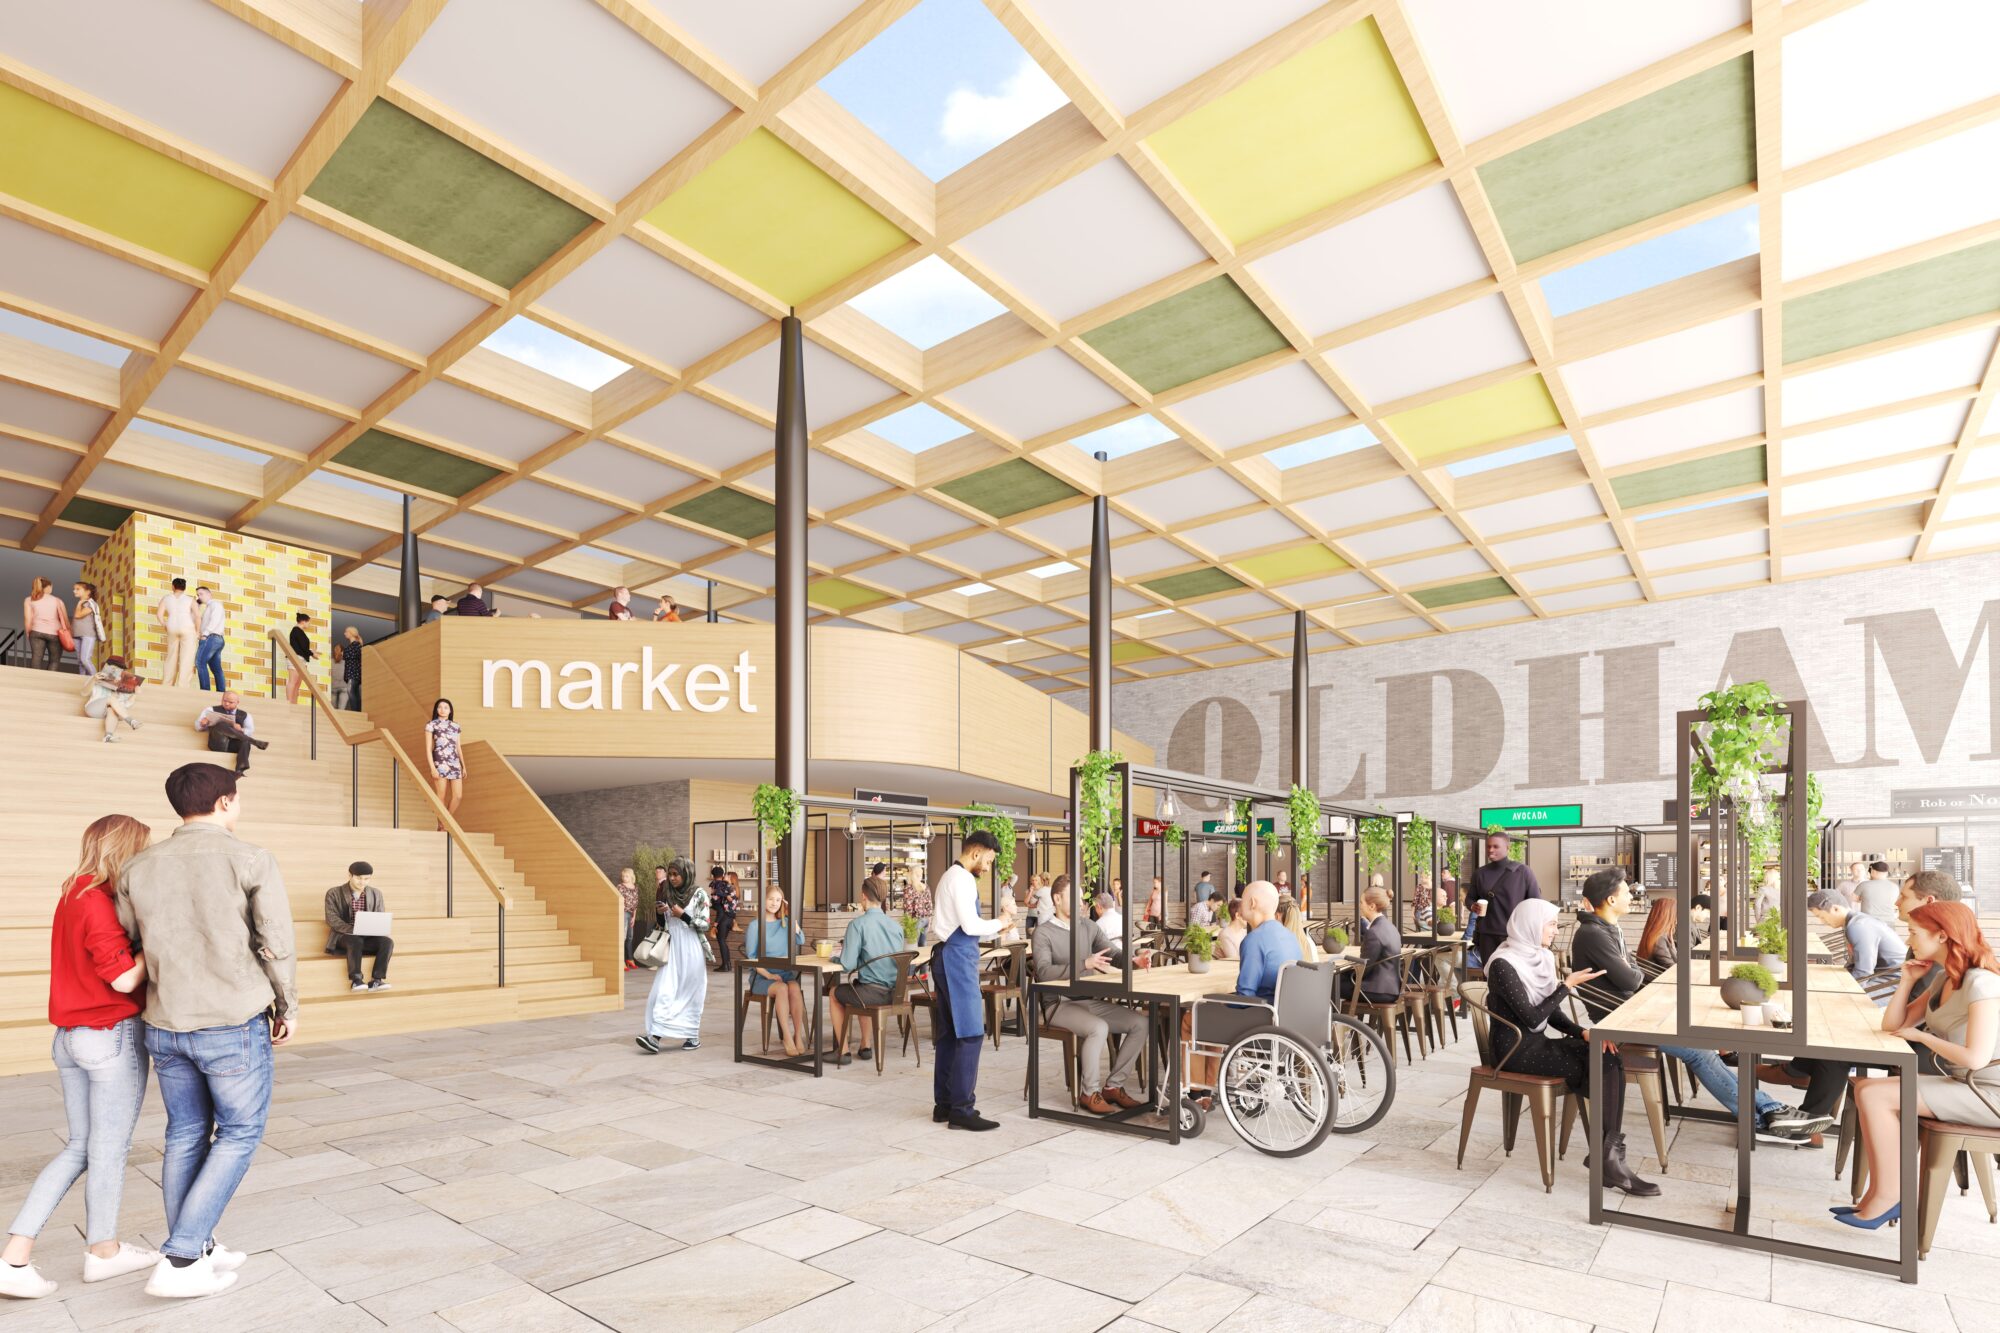 Initial proposals for the new market space